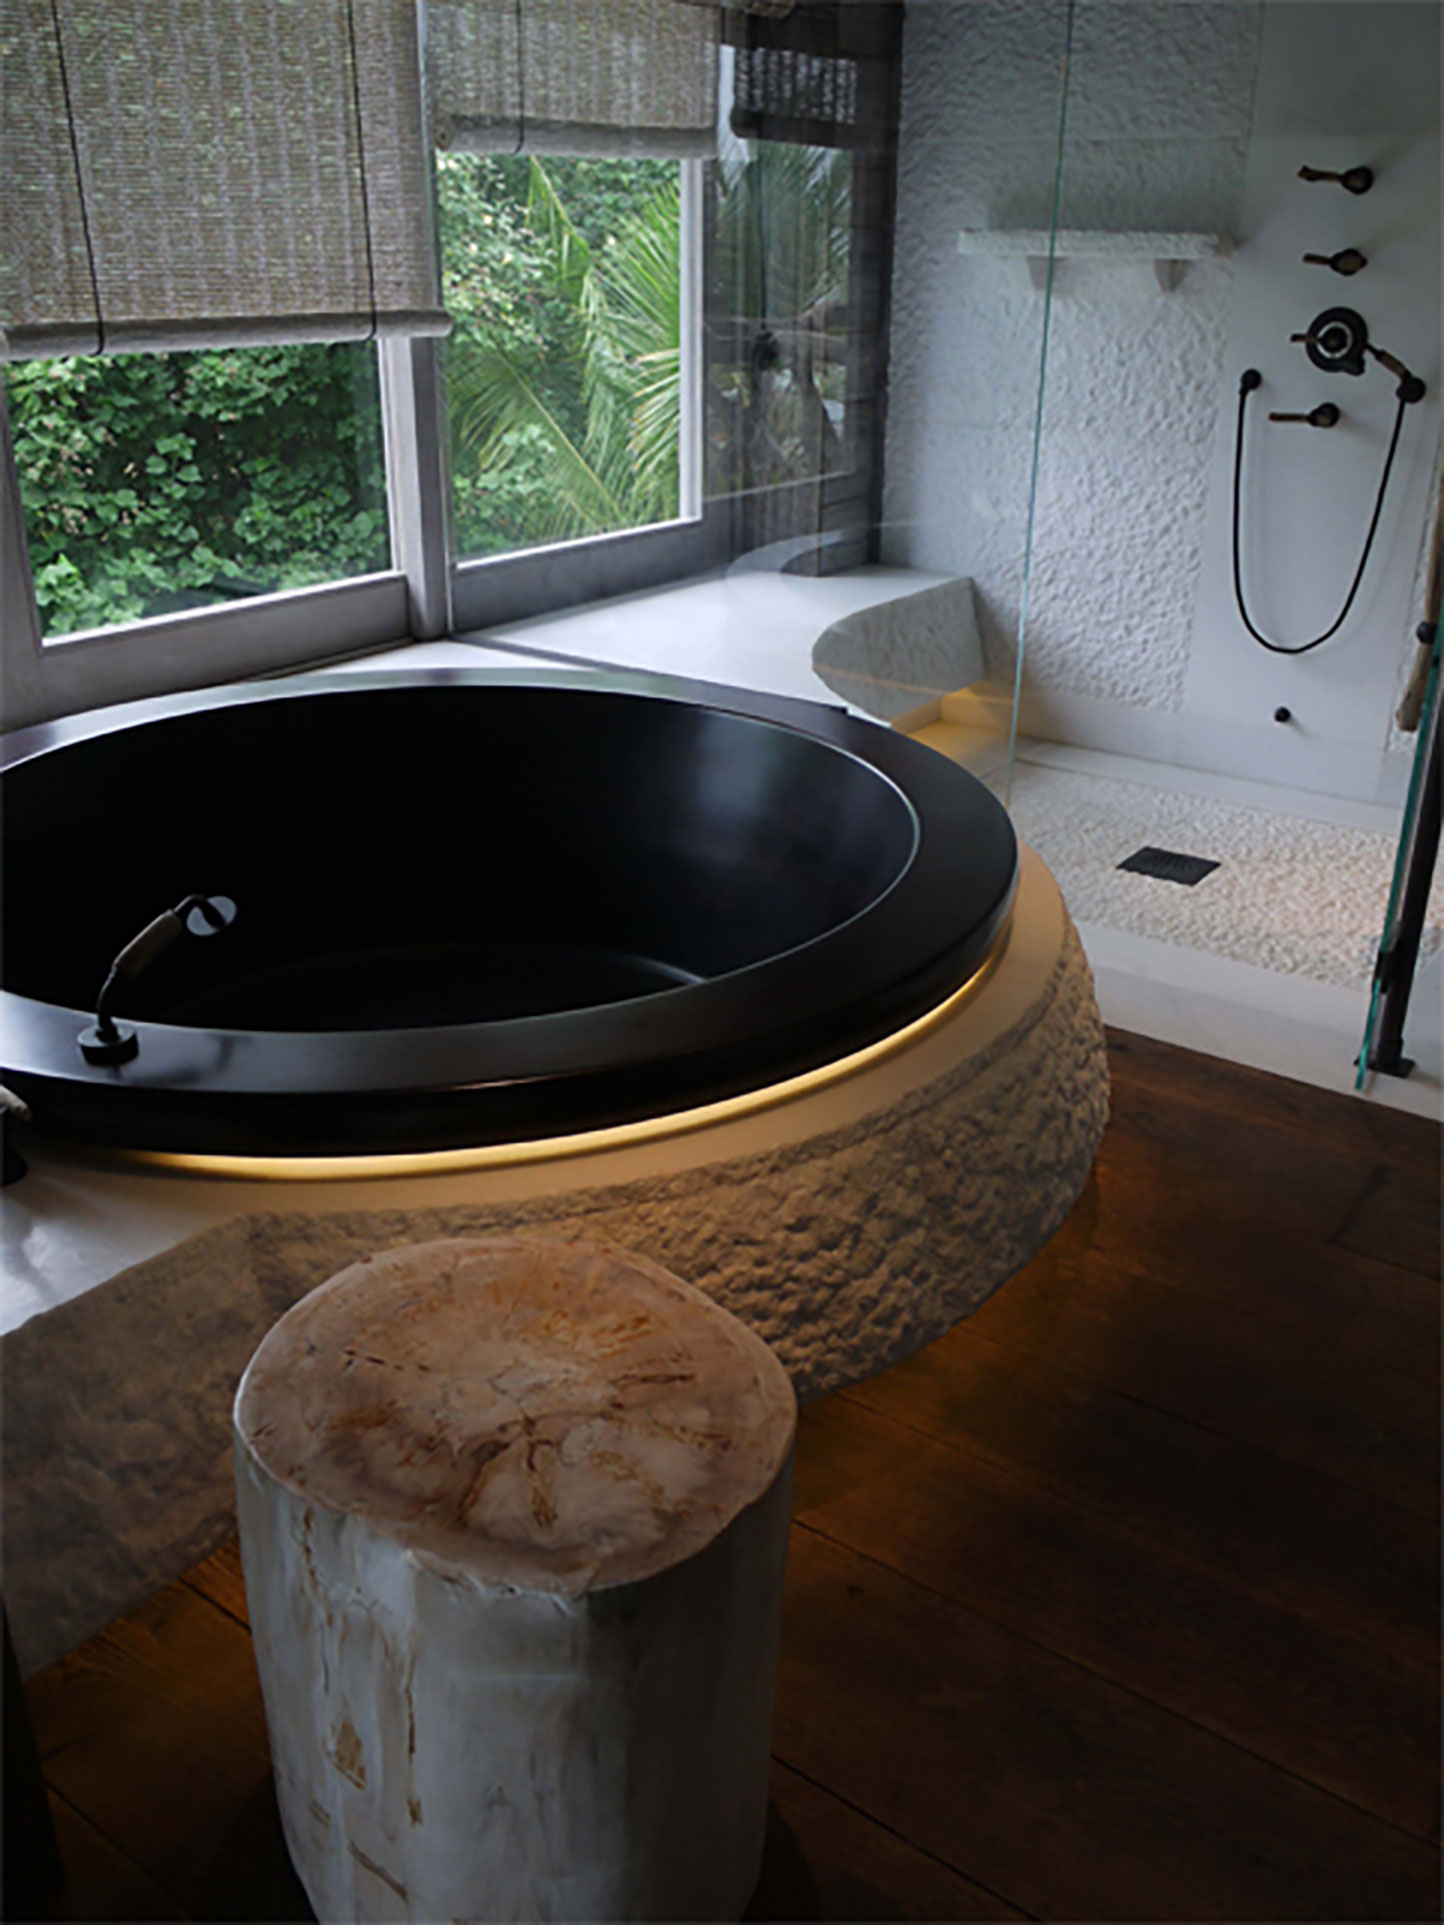 Image no. 1 of Custom wooden bathtub made in stained Walnut  - Seychelles